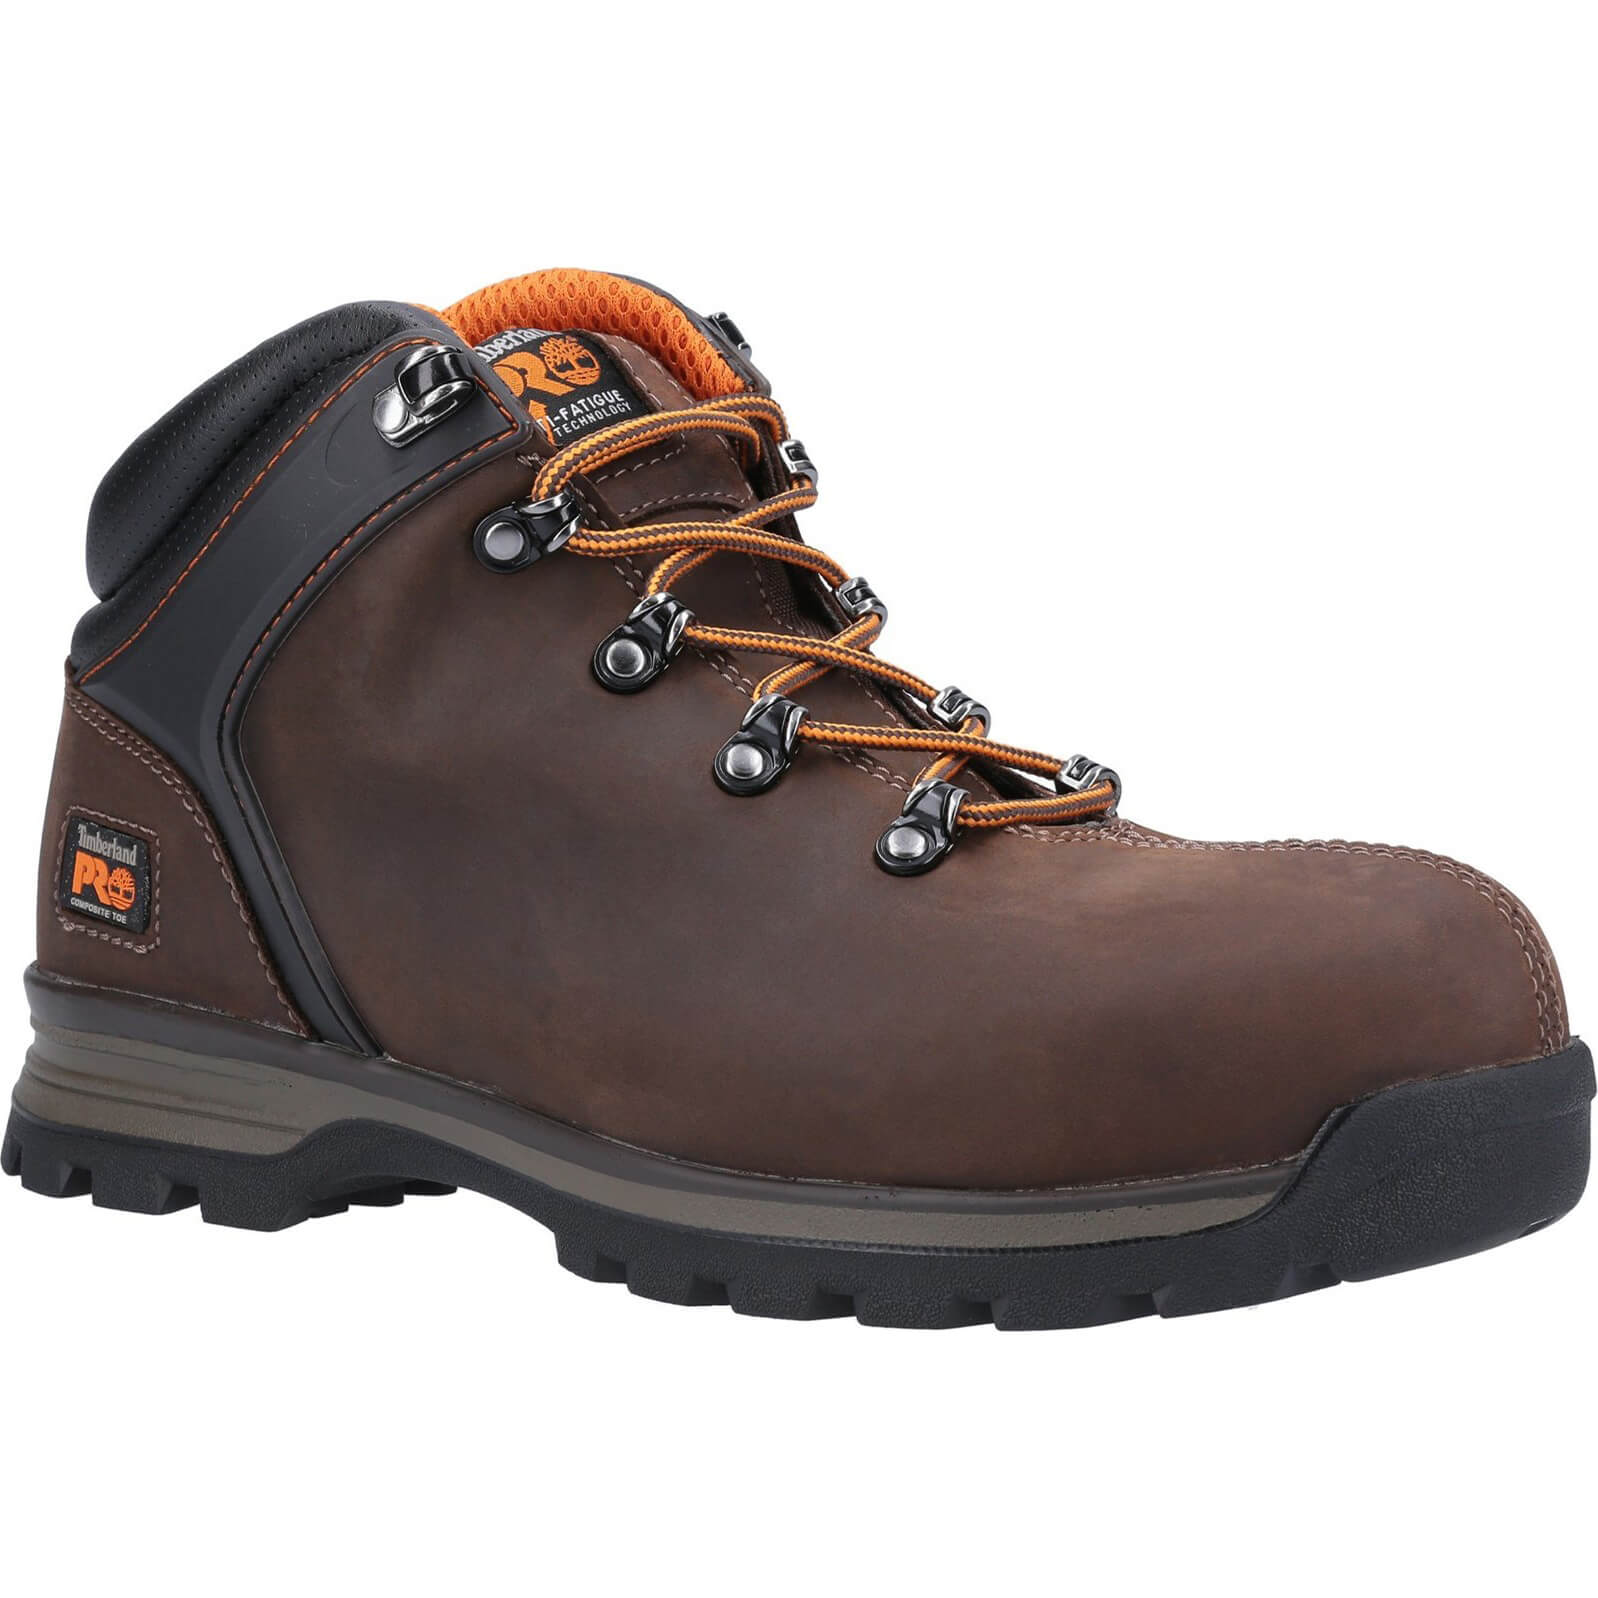 Image of Timberland Pro Splitrock XT Composite Safety Toe Work Boot Brown Size 13